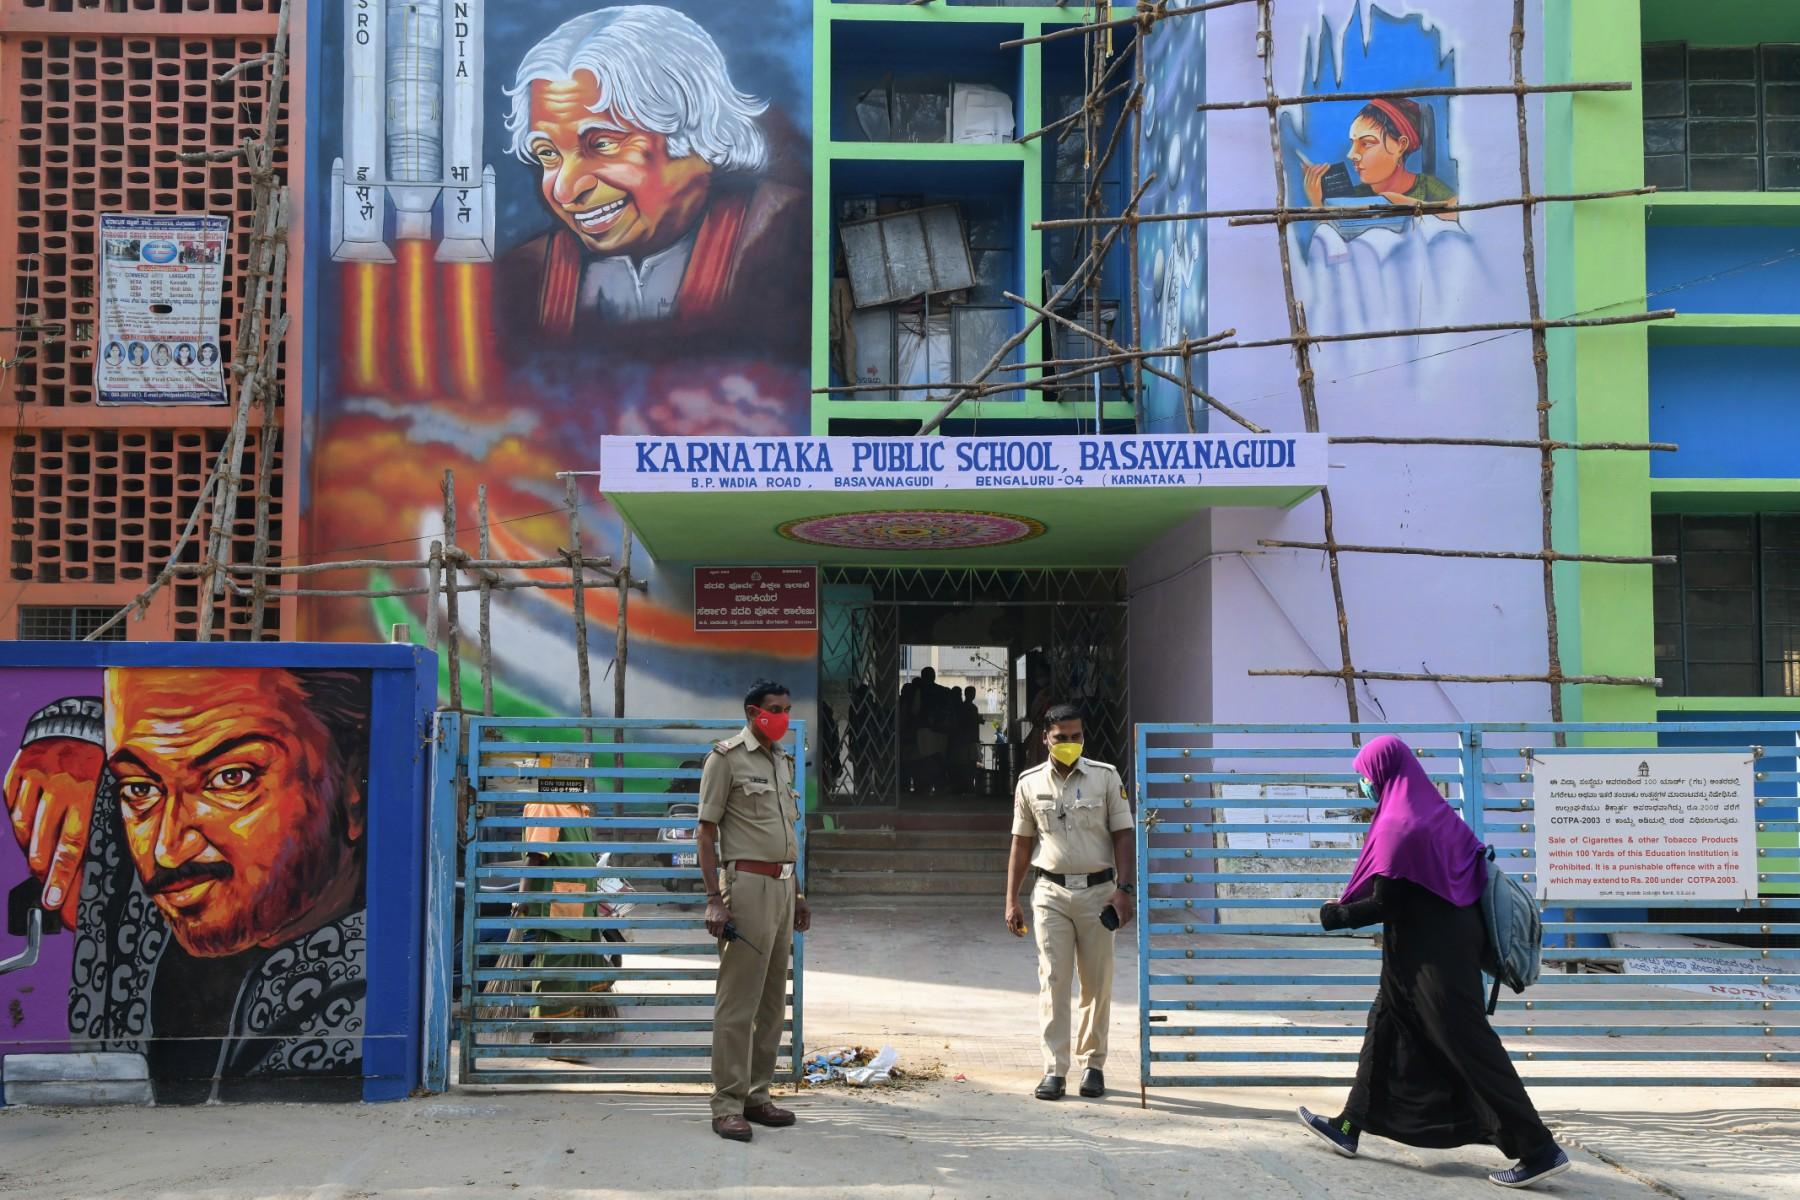 Police stand guard as a student of a government high school and pre-university college for women enters the premises of the educational institute in Bangalore on Feb 16, after schools reopened in southern India under tight security after authorities banned public gatherings following protests over Muslim girls wearing the hijab in classrooms. Photo: AFP